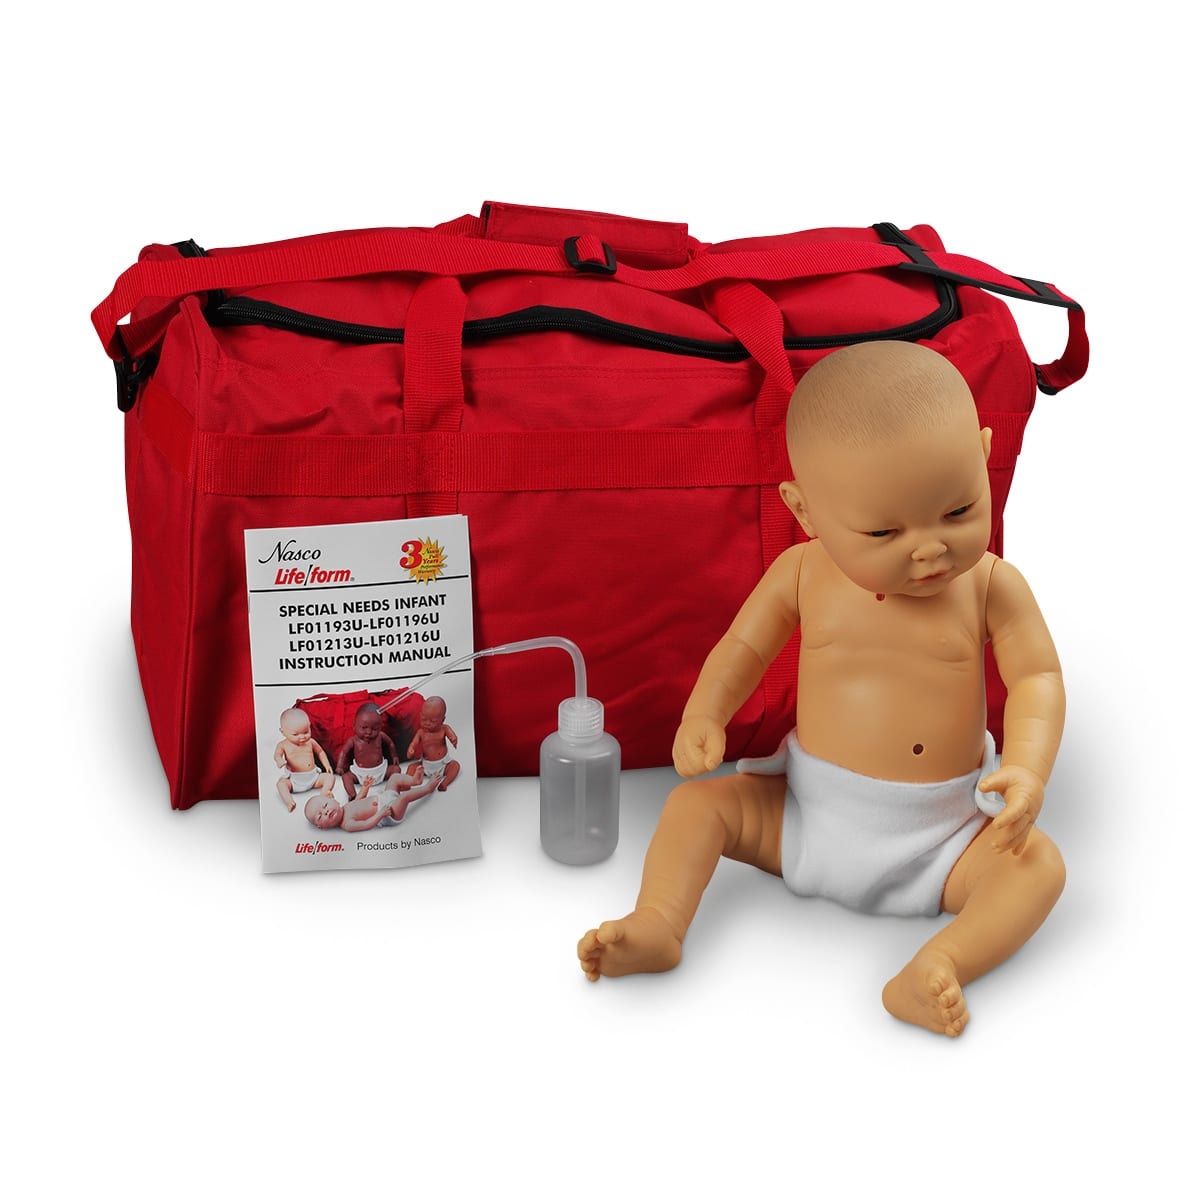 Special Needs Infant – Asian Female – Special Needs Infant Simulator – Medical Teaching Equipment – Simulaids